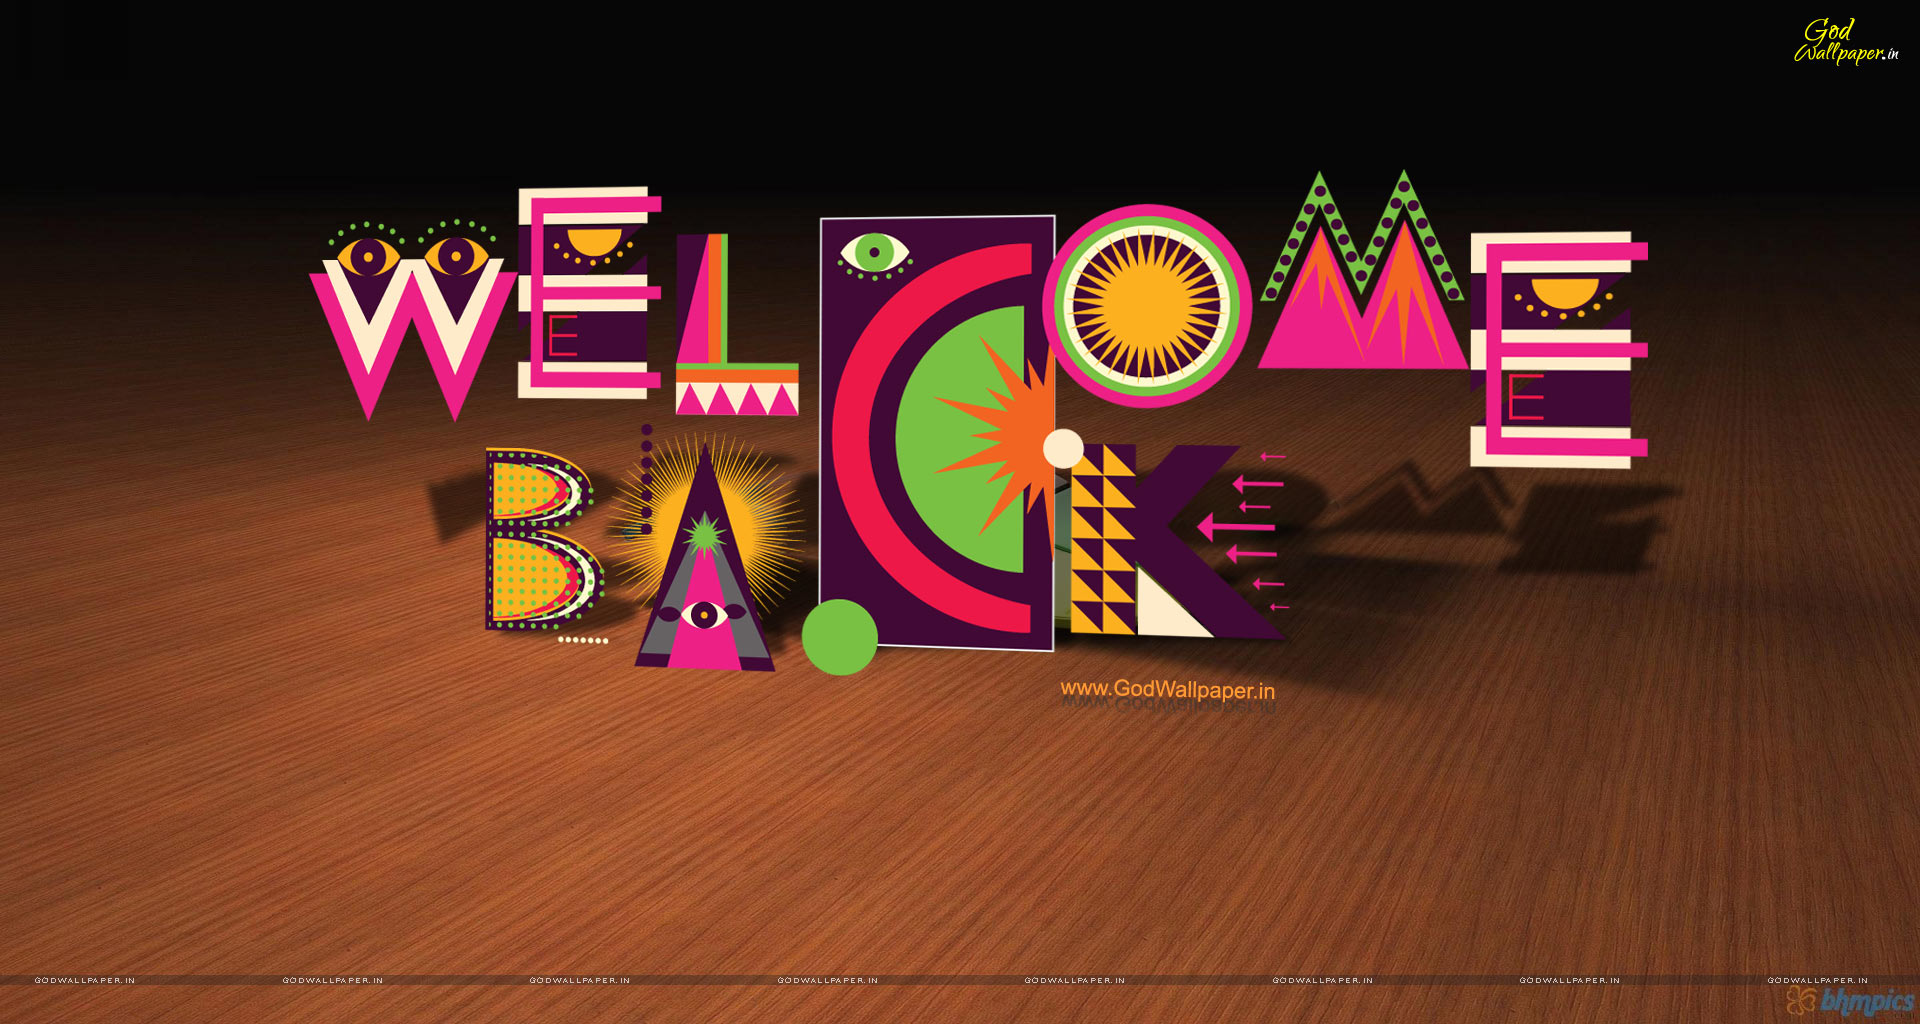 Welcome back bella how was. Weirdcore Welcome back обои. You re Welcome заставка. Welcome Shole Wallpaper. Welcome back рок.